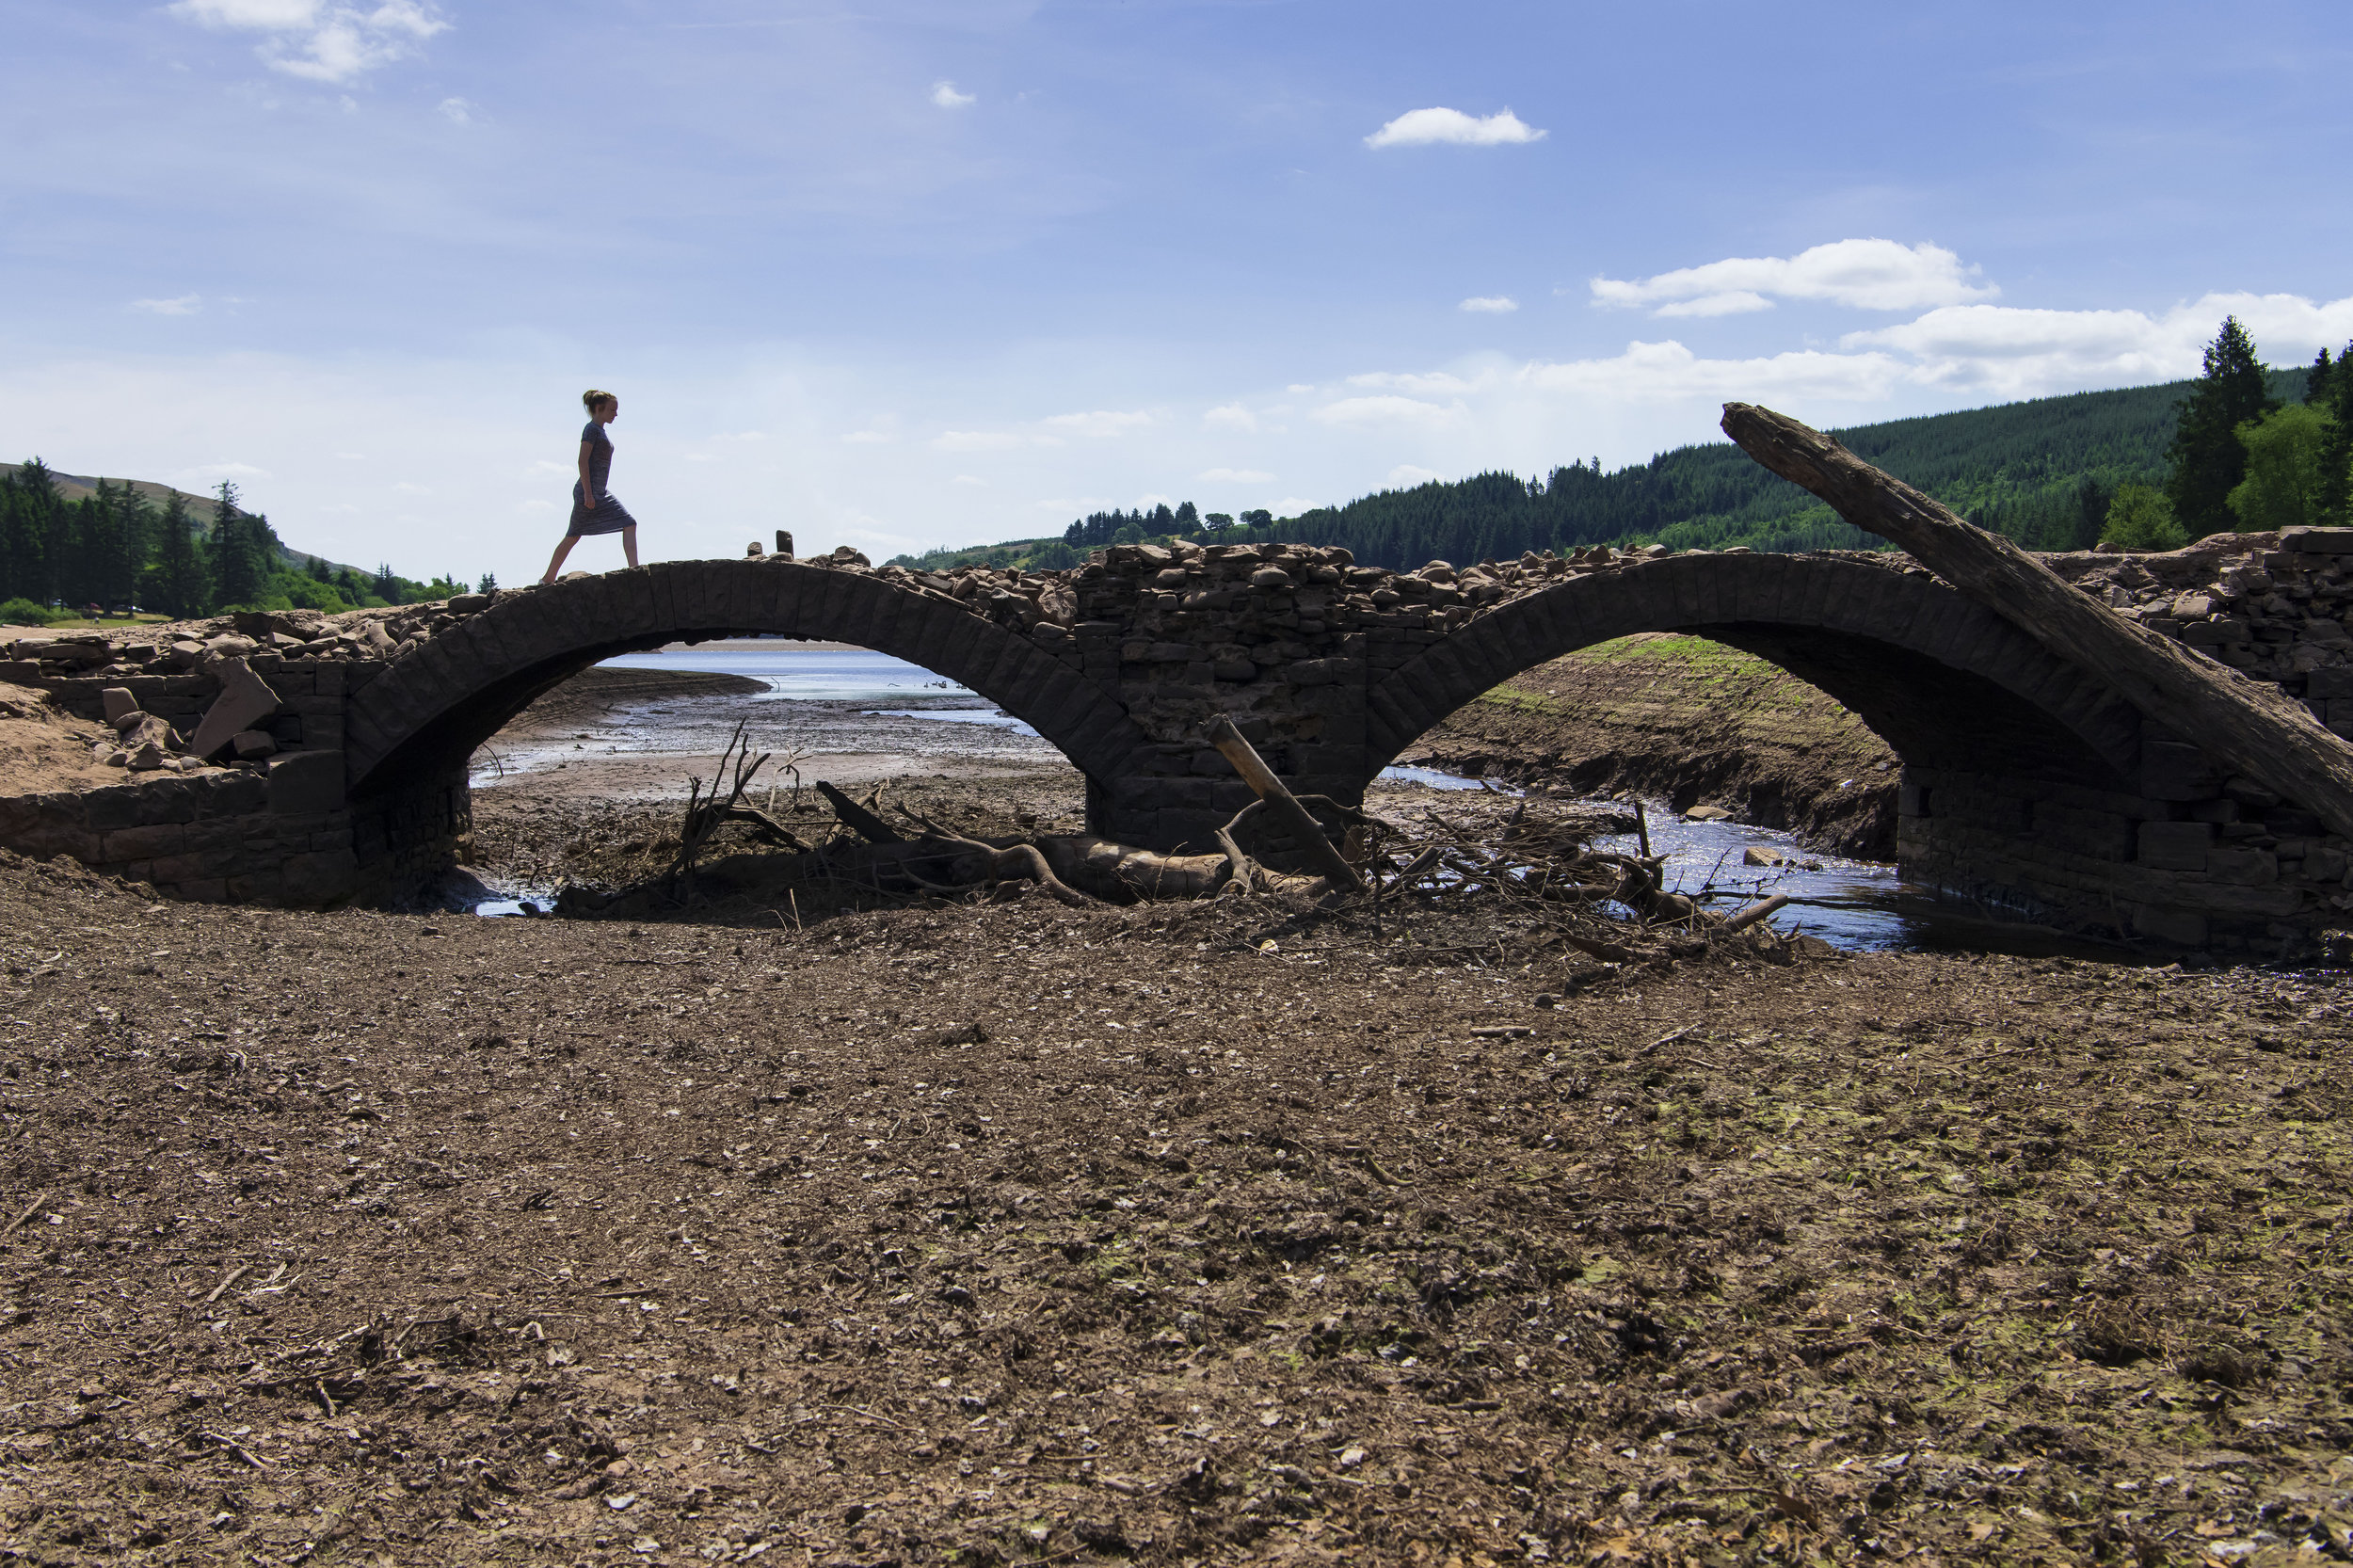  MERTHYR TYDFIL, WALES - JULY 25: A girl crosses a bridge at the Llwyn-on Reservoir, owned by Welsh Water, in the Taf Fawr valley on July 25, 2018 in Merthyr Tydfil, Wales. The lack of rainfall over the last few weeks combined with record breaking te